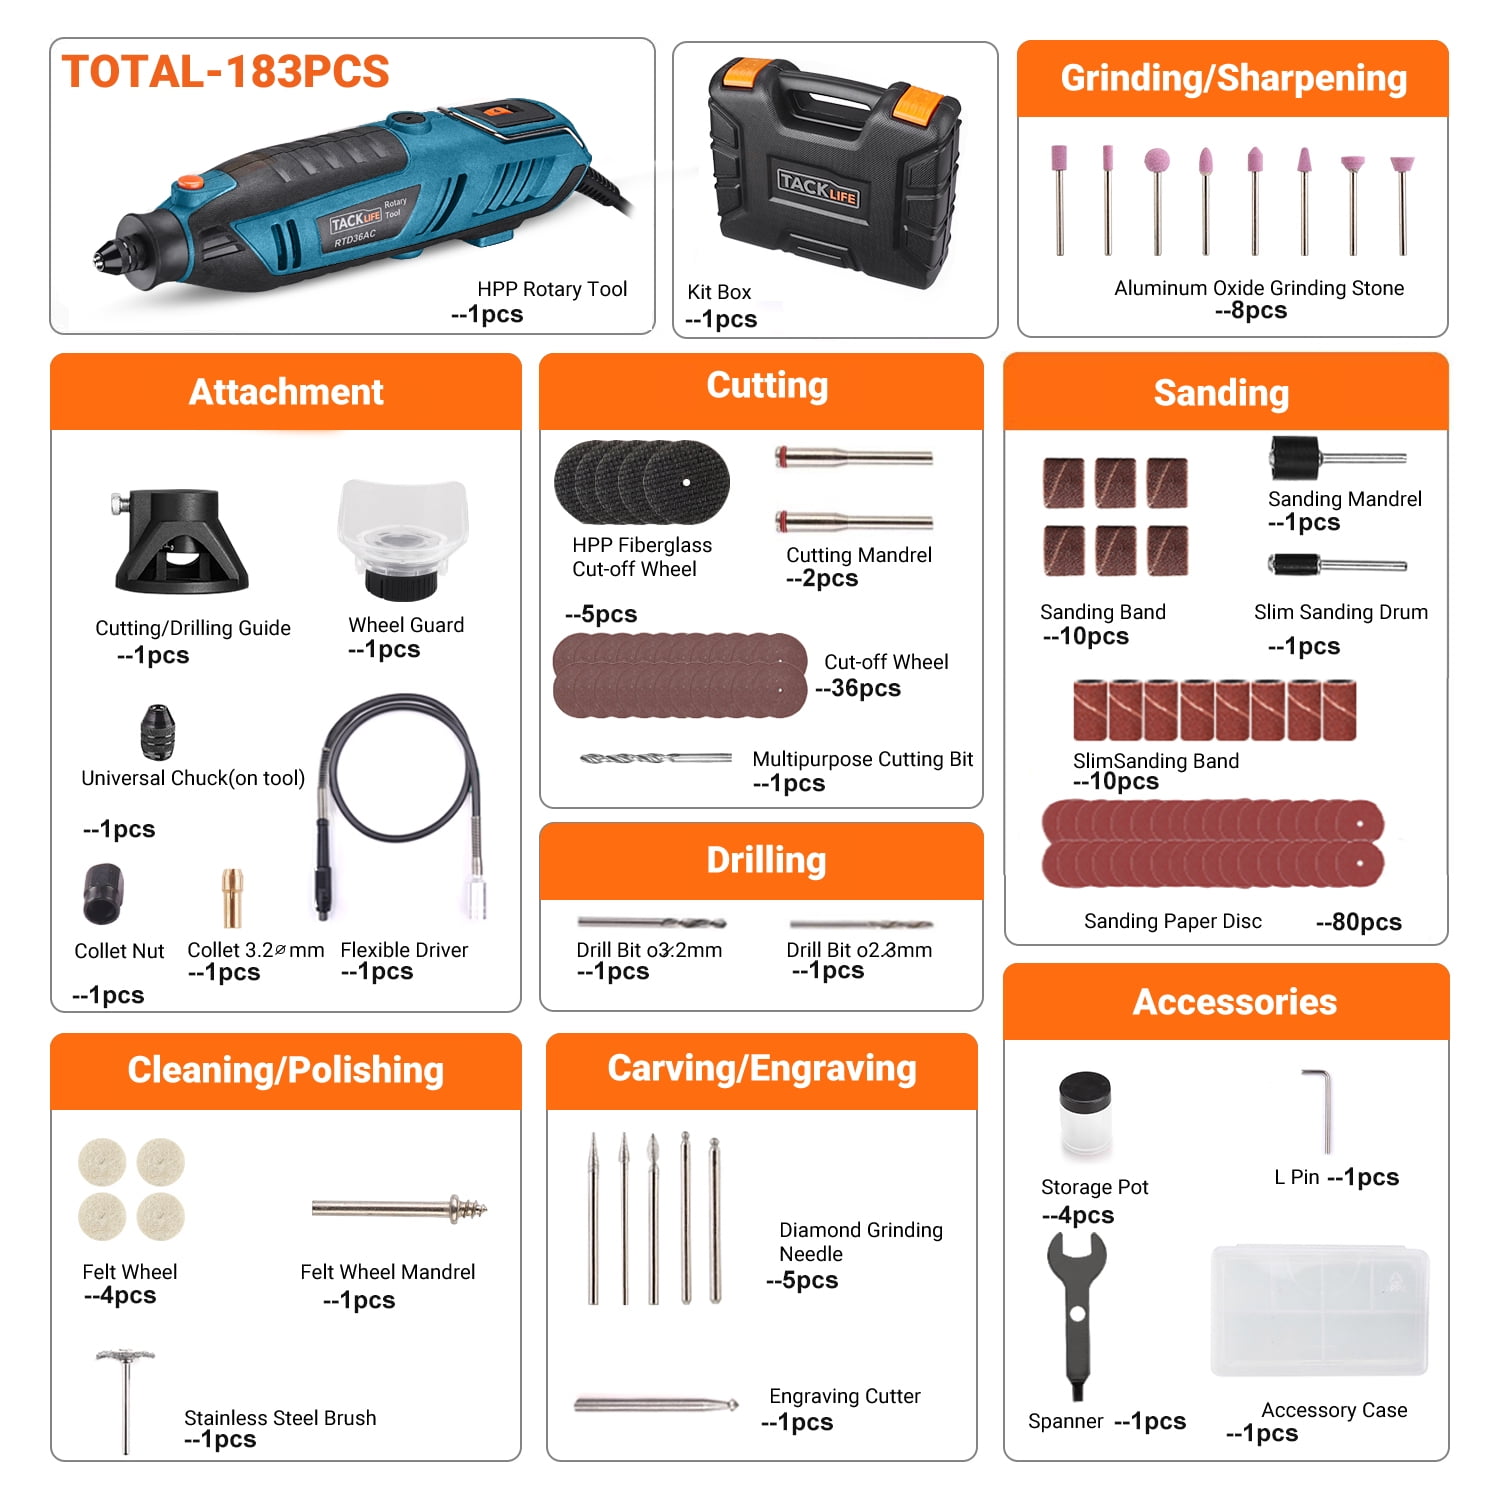 Carrying Case Multi-Functional For Around-The-House And Crafting Projects Grey RTD36AC Rotary Tool 200W Power Variable Speed With 170 Accessories MultiPro Keyless Chuck And Flex Shaft 